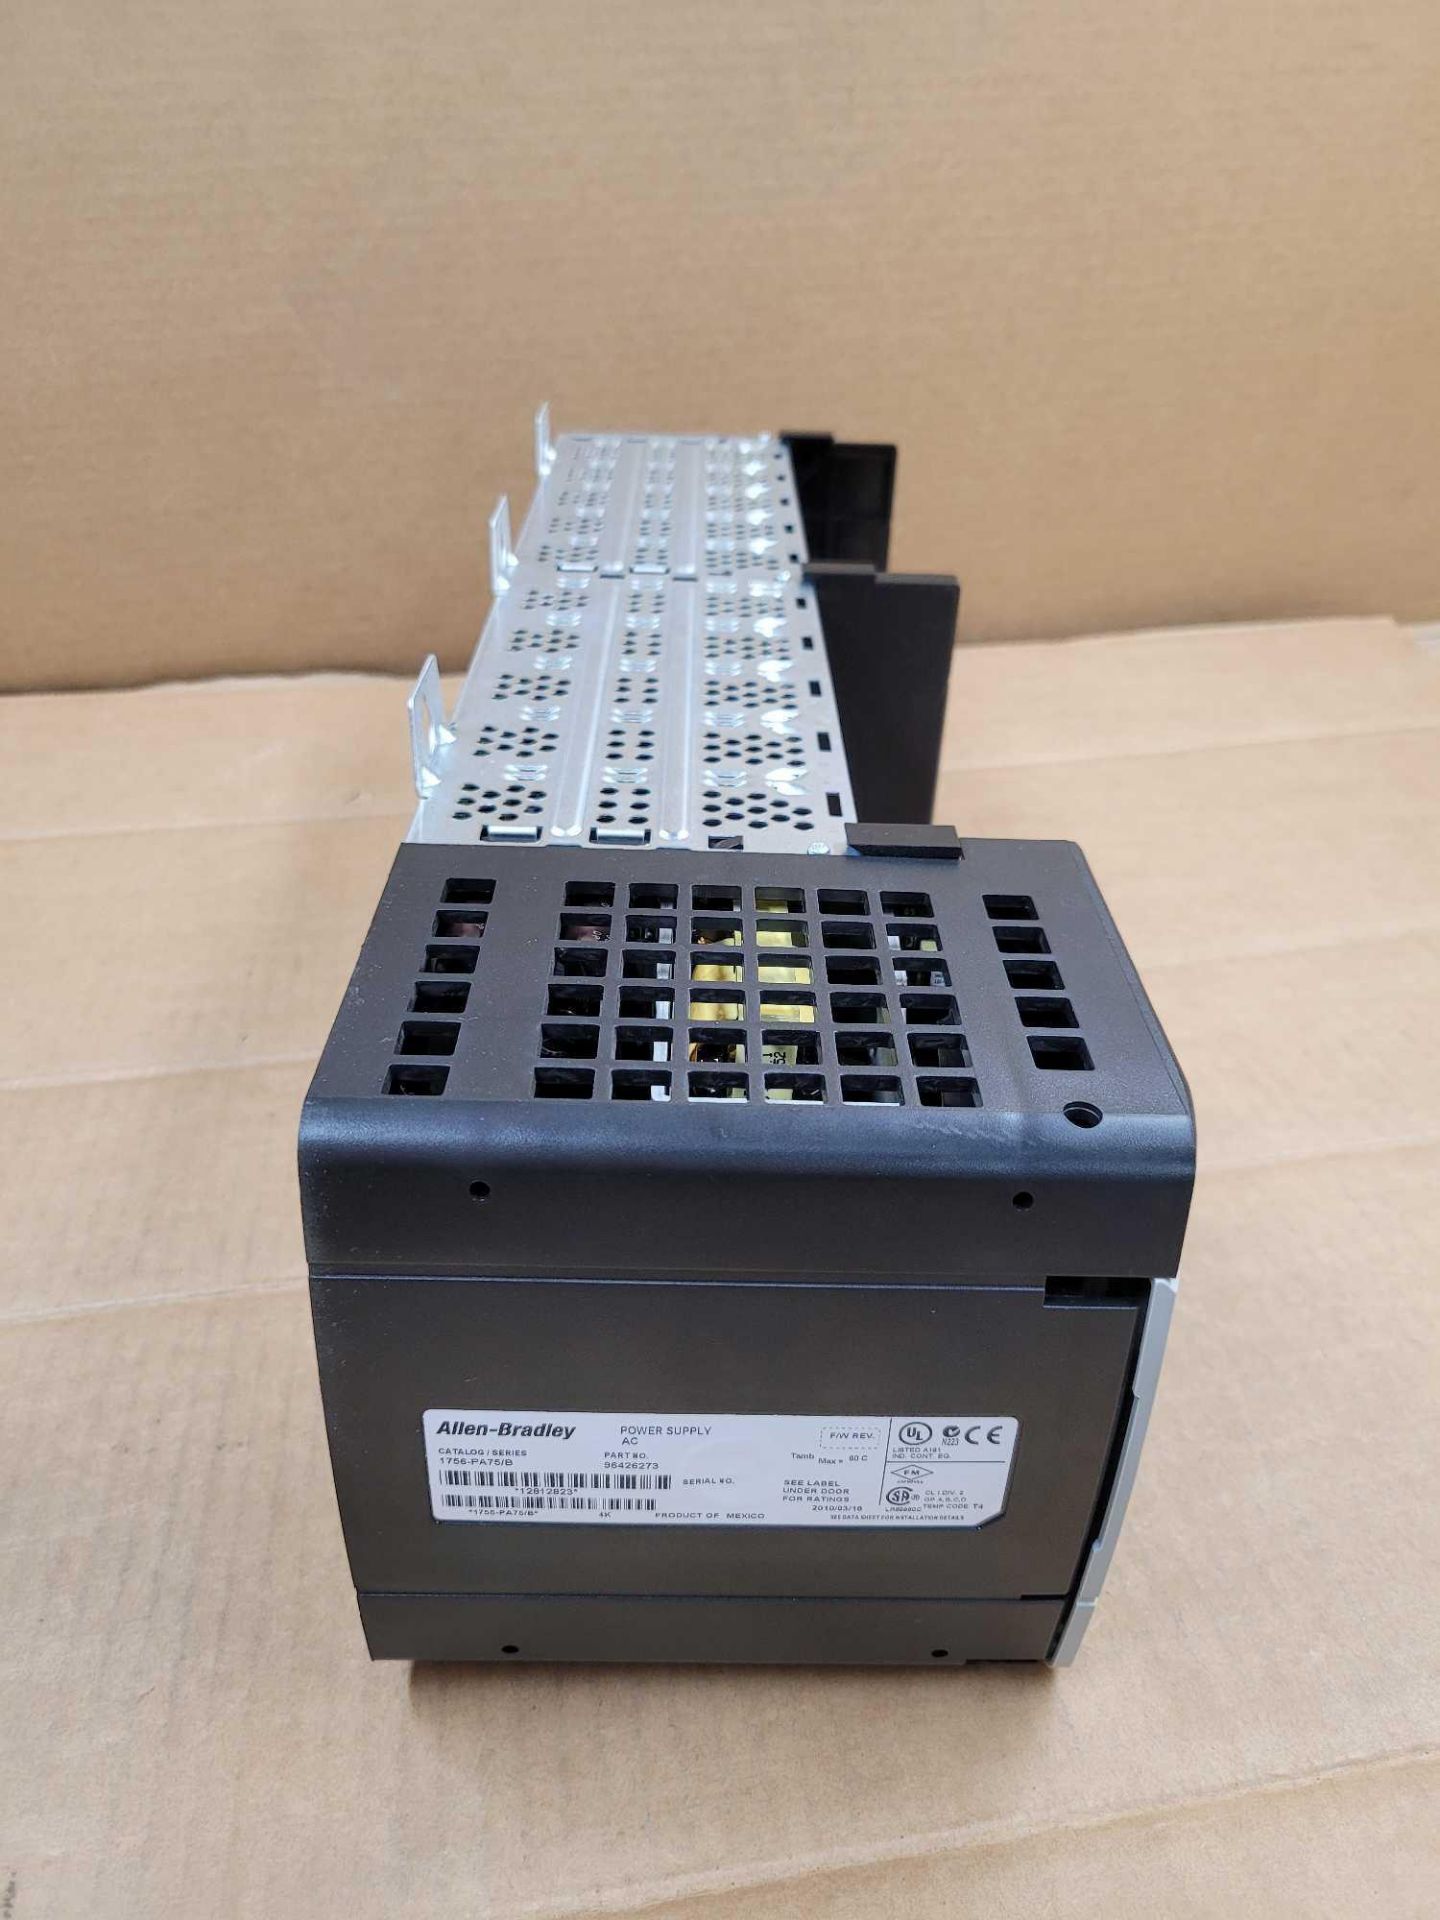 ALLEN BRADLEY 1756-PA75 with 1756-A10 / Series B ControlLogix Power Supply with Series B 10 Slot PLC - Image 5 of 8